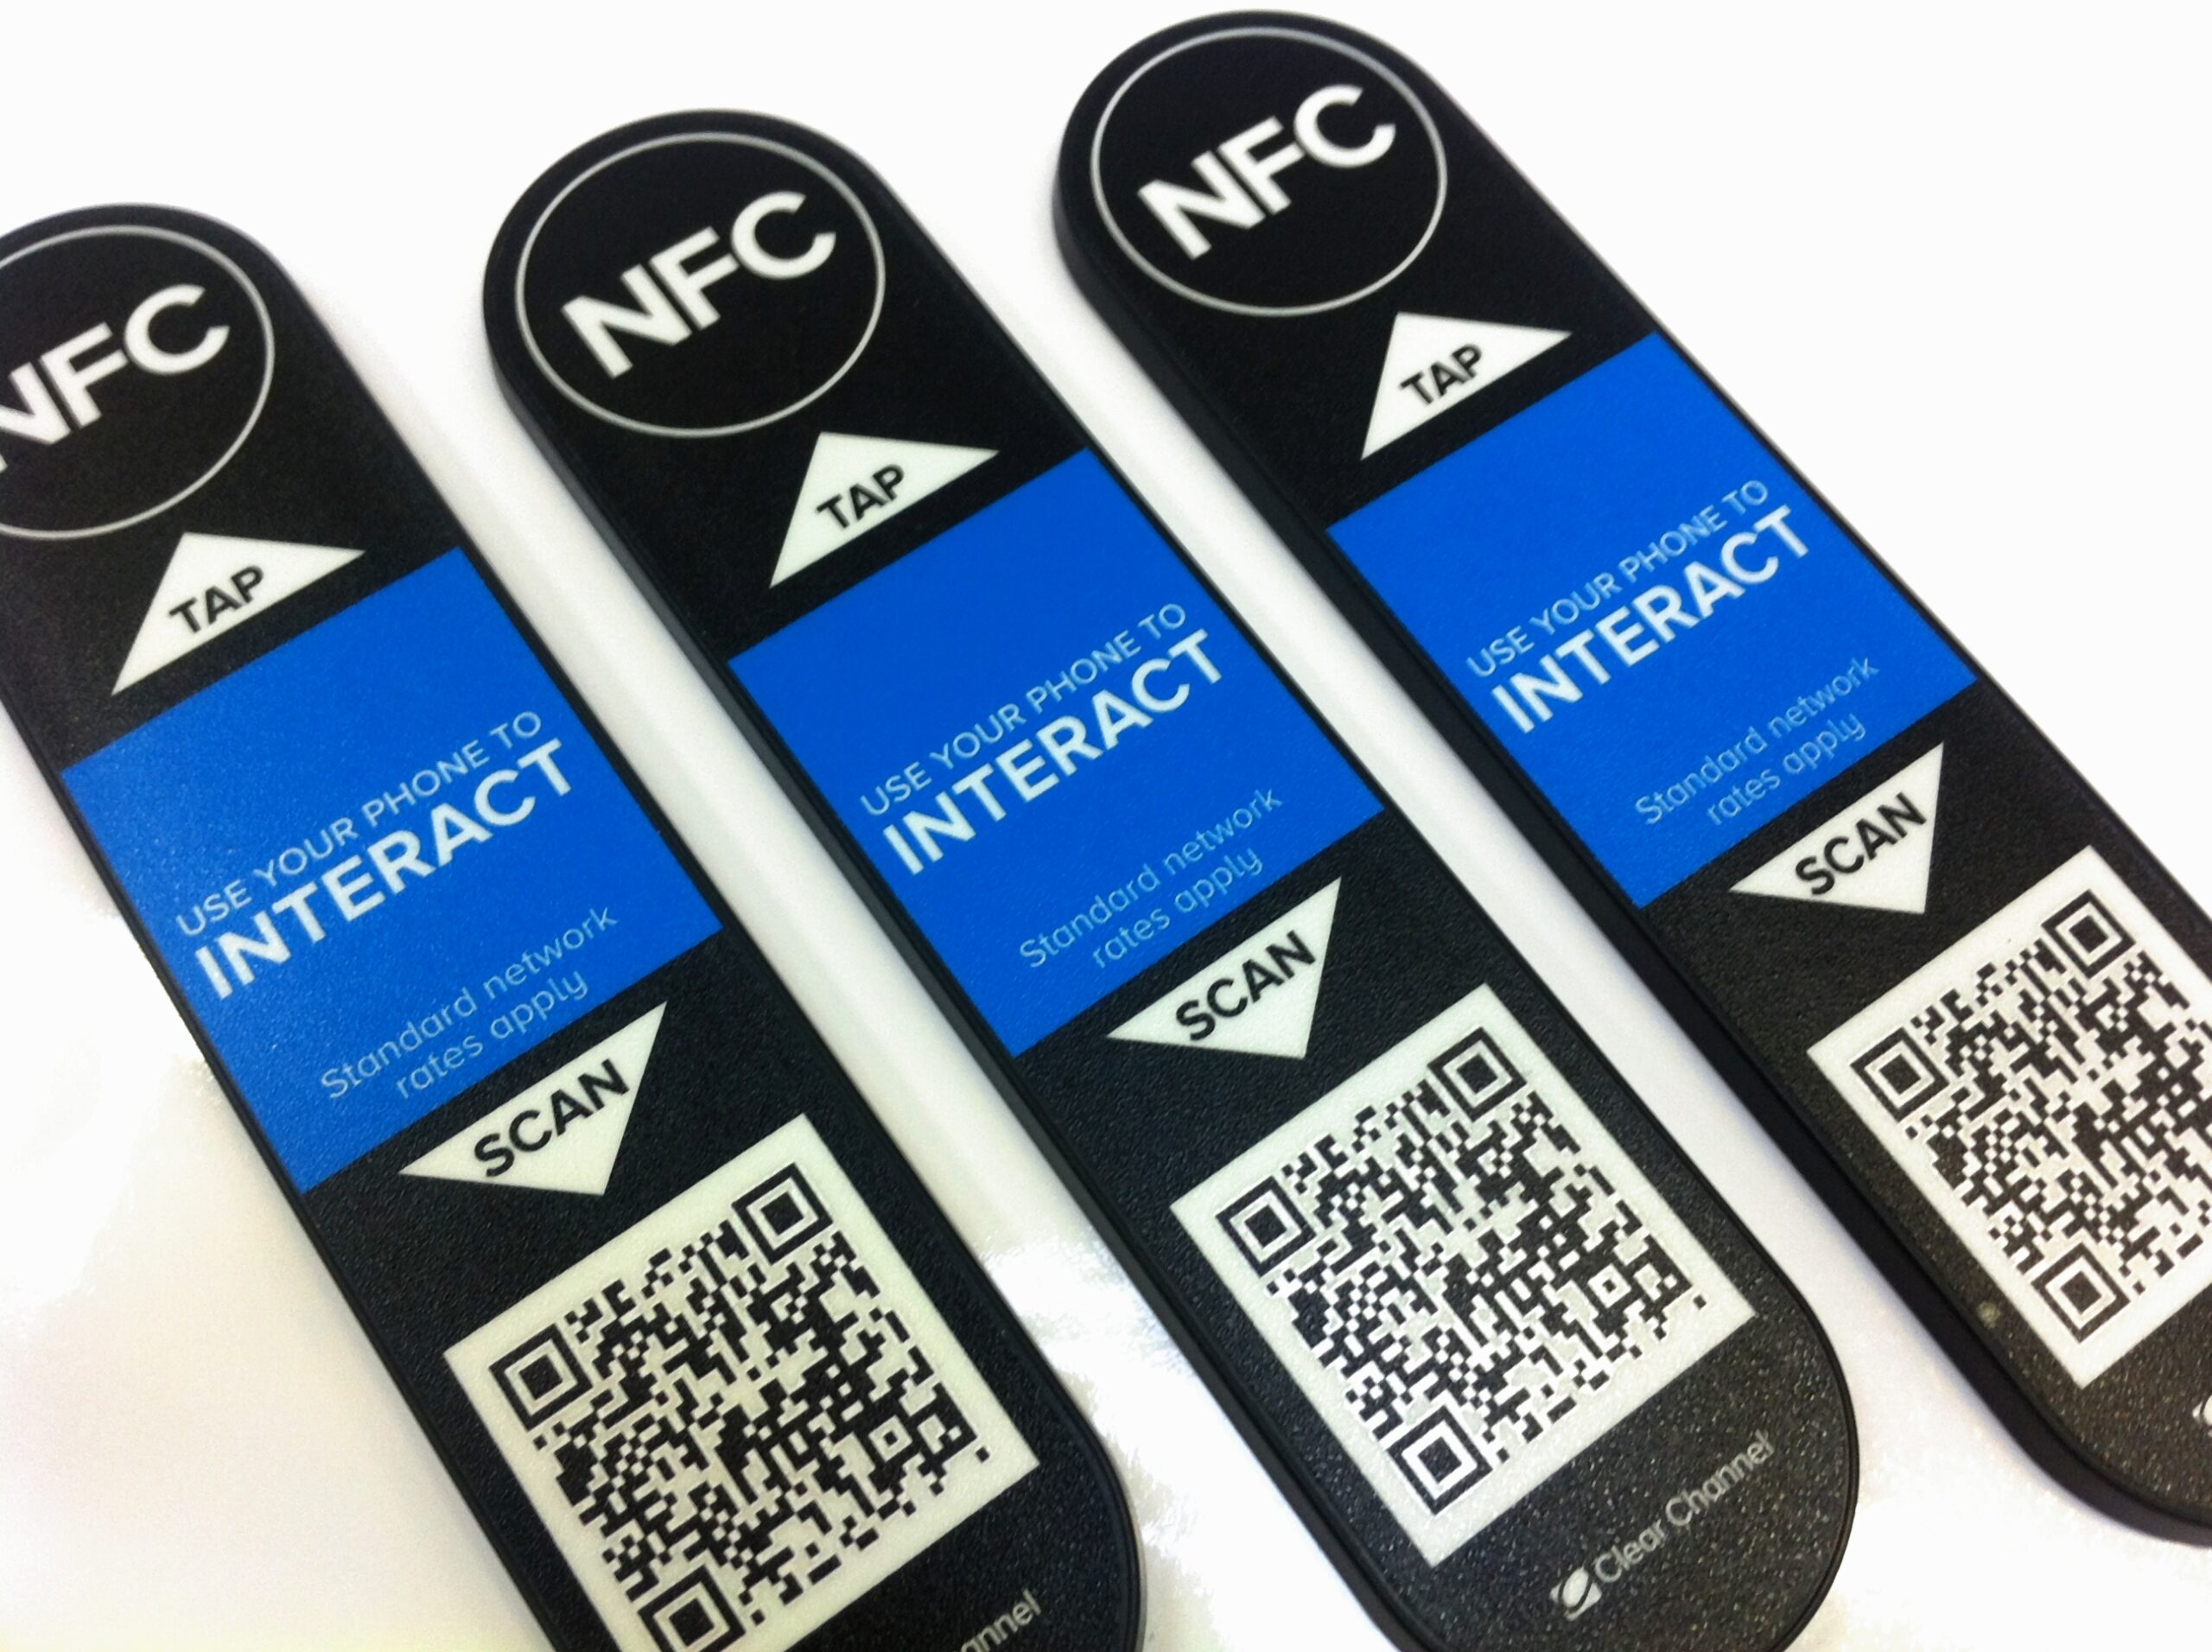 Three custom QR code labels on a white surface.